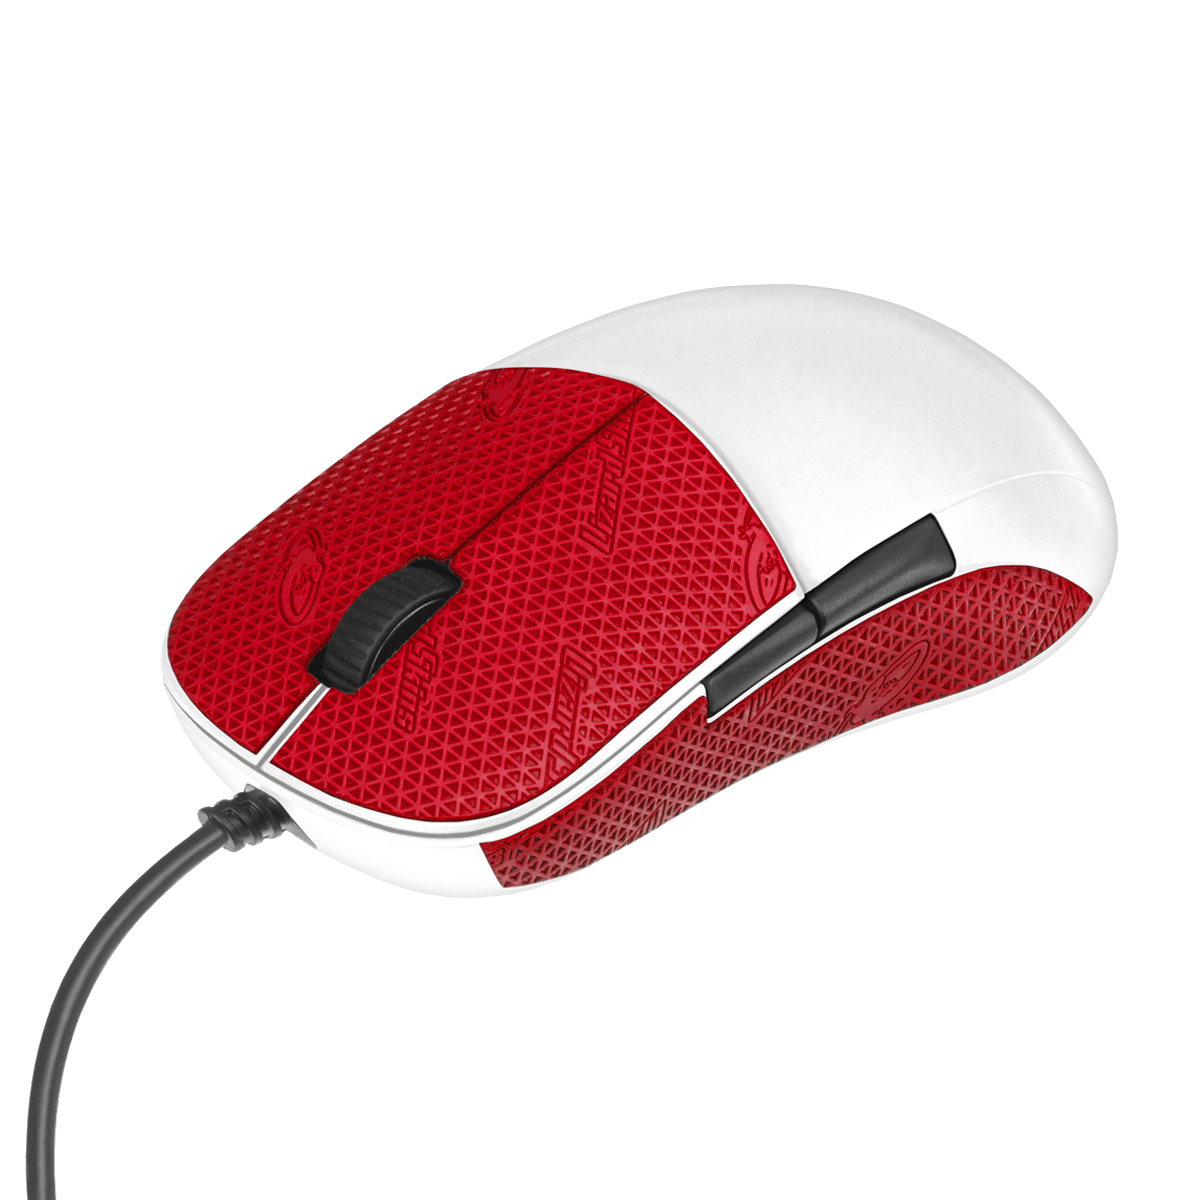 Lizard Skins Grip DSP Mouse Crimson Red